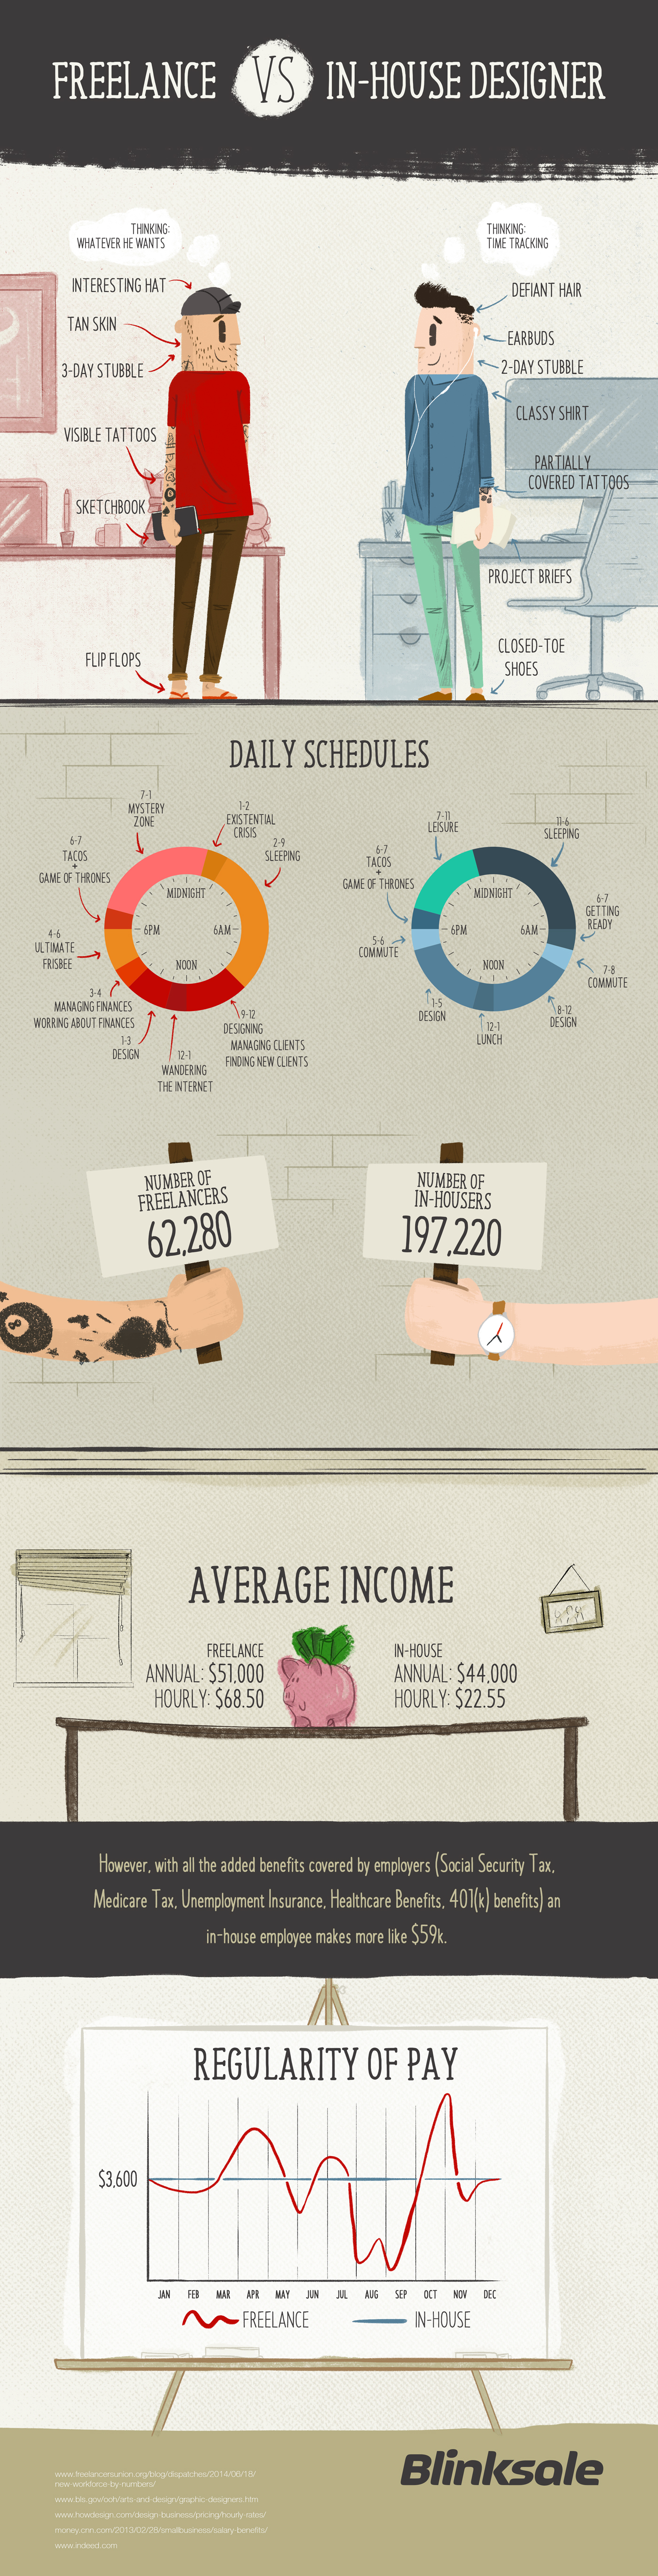 infographic info information Freelance in-house designers characters poster